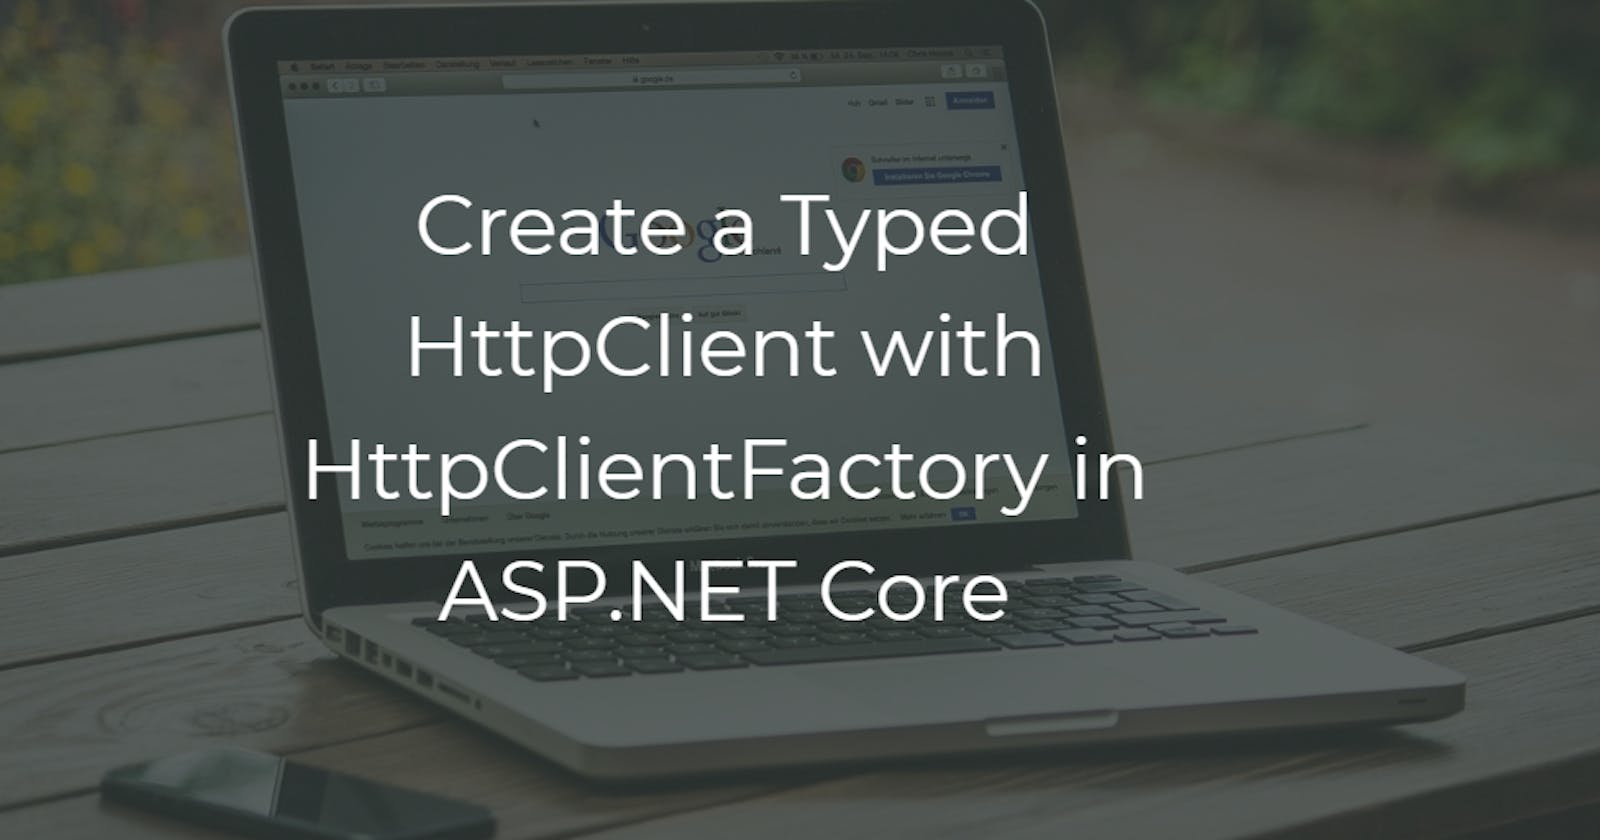 Create a Typed HttpClient with HttpClientFactory in ASP.NET Core